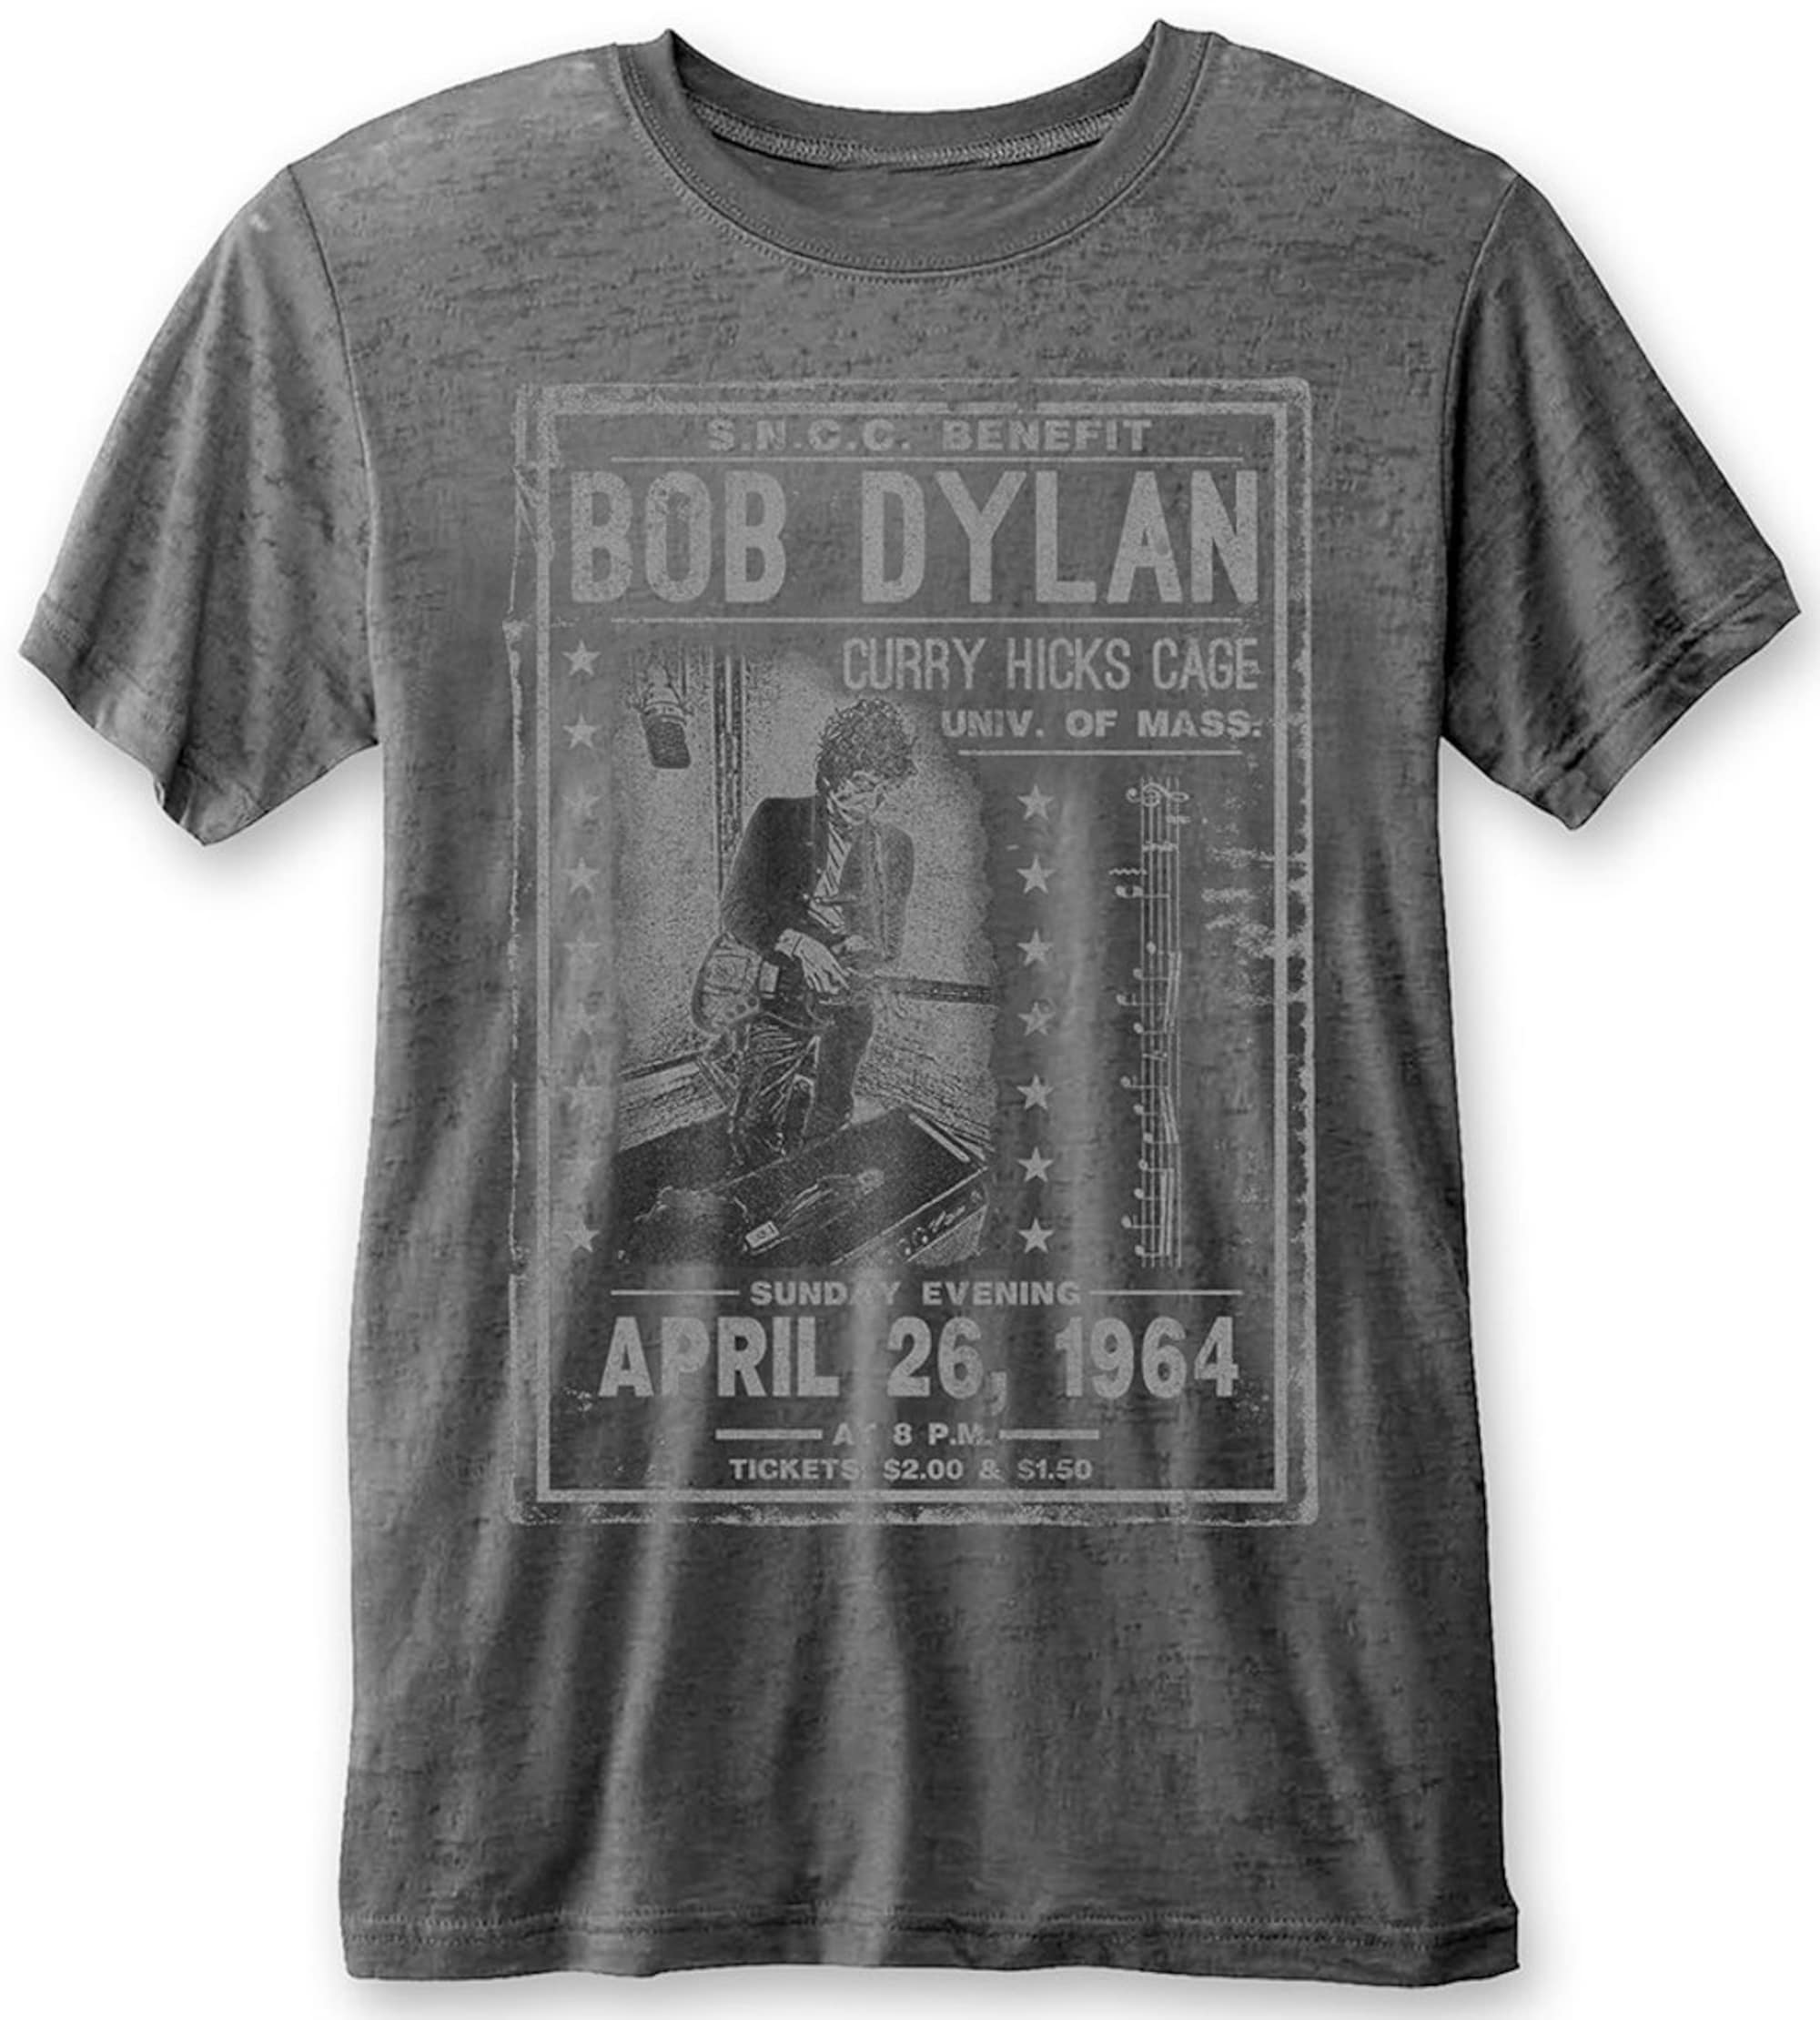 Bob Dylan - Curry Hicks Cage T Shirt